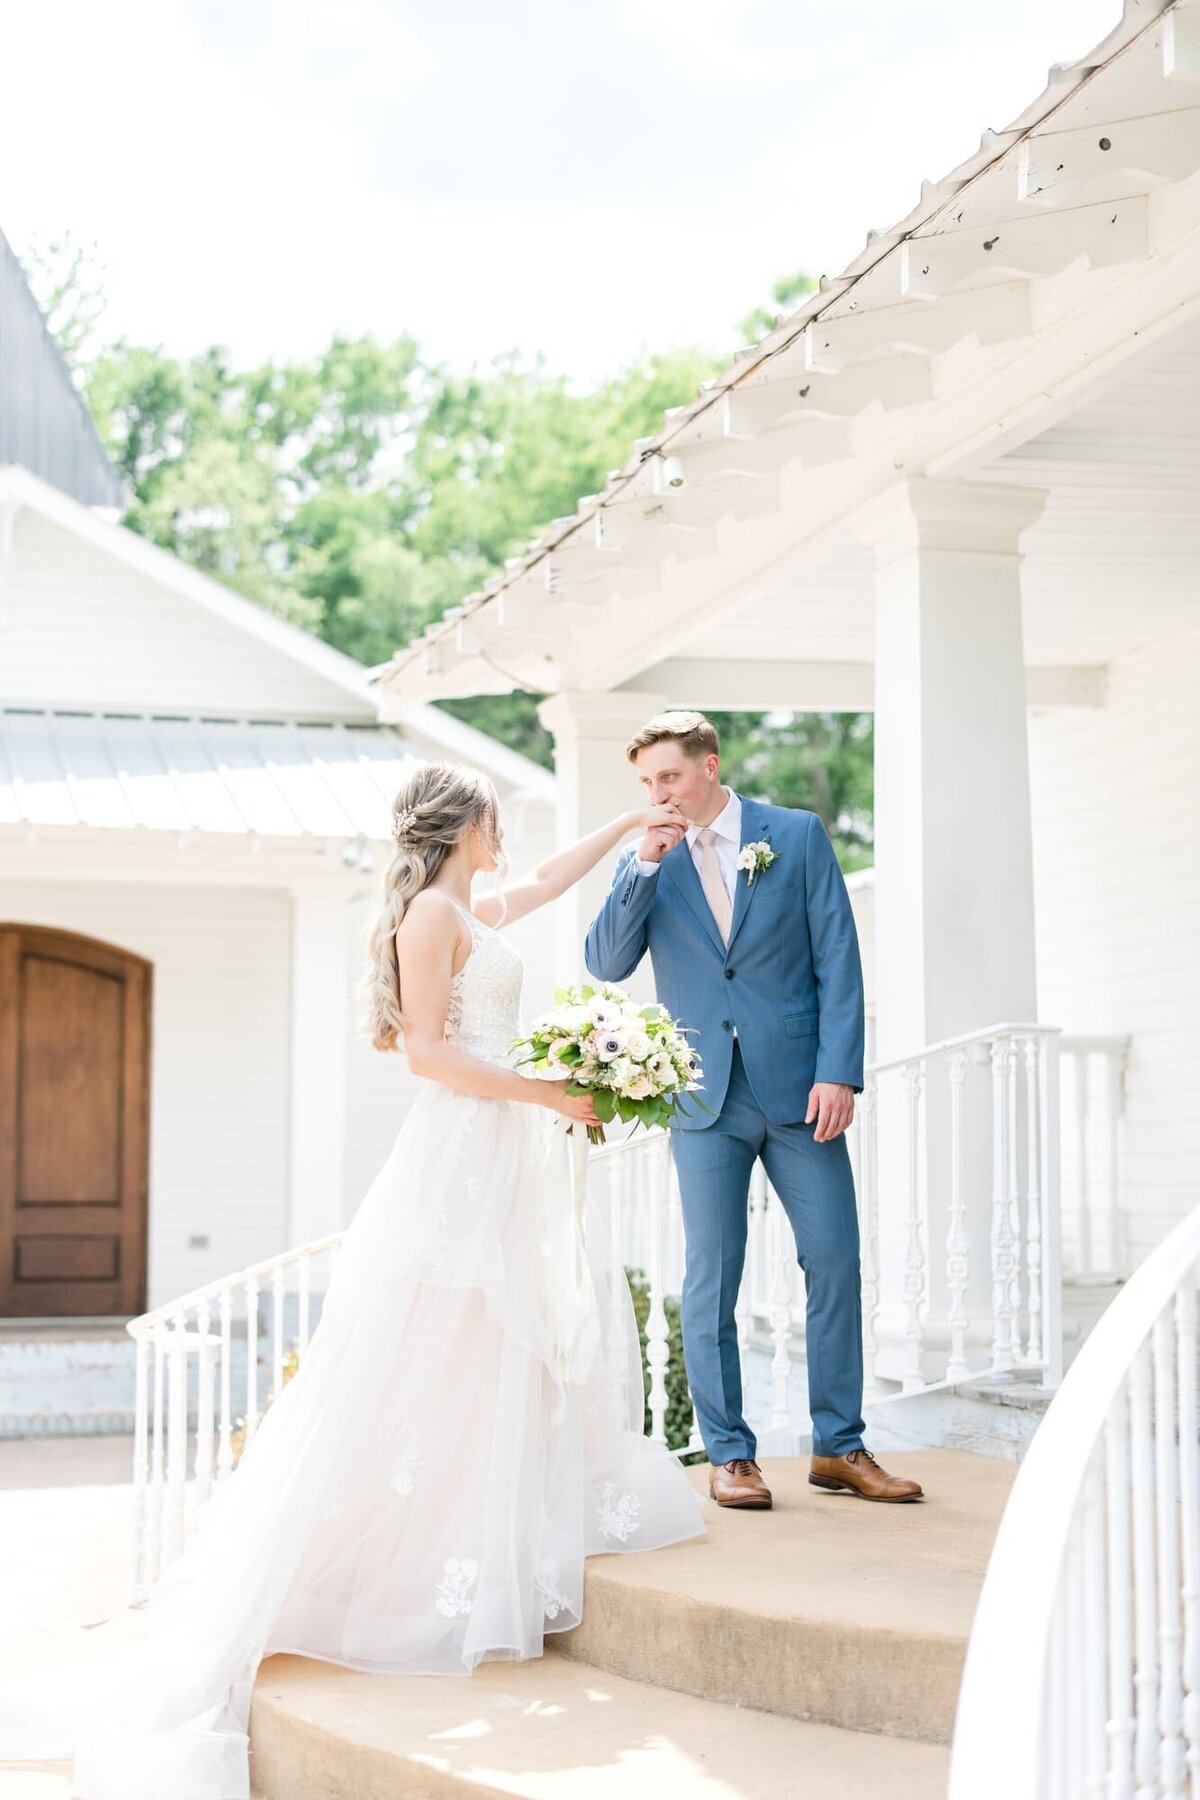 Katie and Alec Wedding Photography Wedding Videography Birmingham, Alabama Husband and Wife Team Photo Video Weddings Engagement Engagements Light Airy Focused on Marriage  Samantha + Connor's Sonne_VZ6J